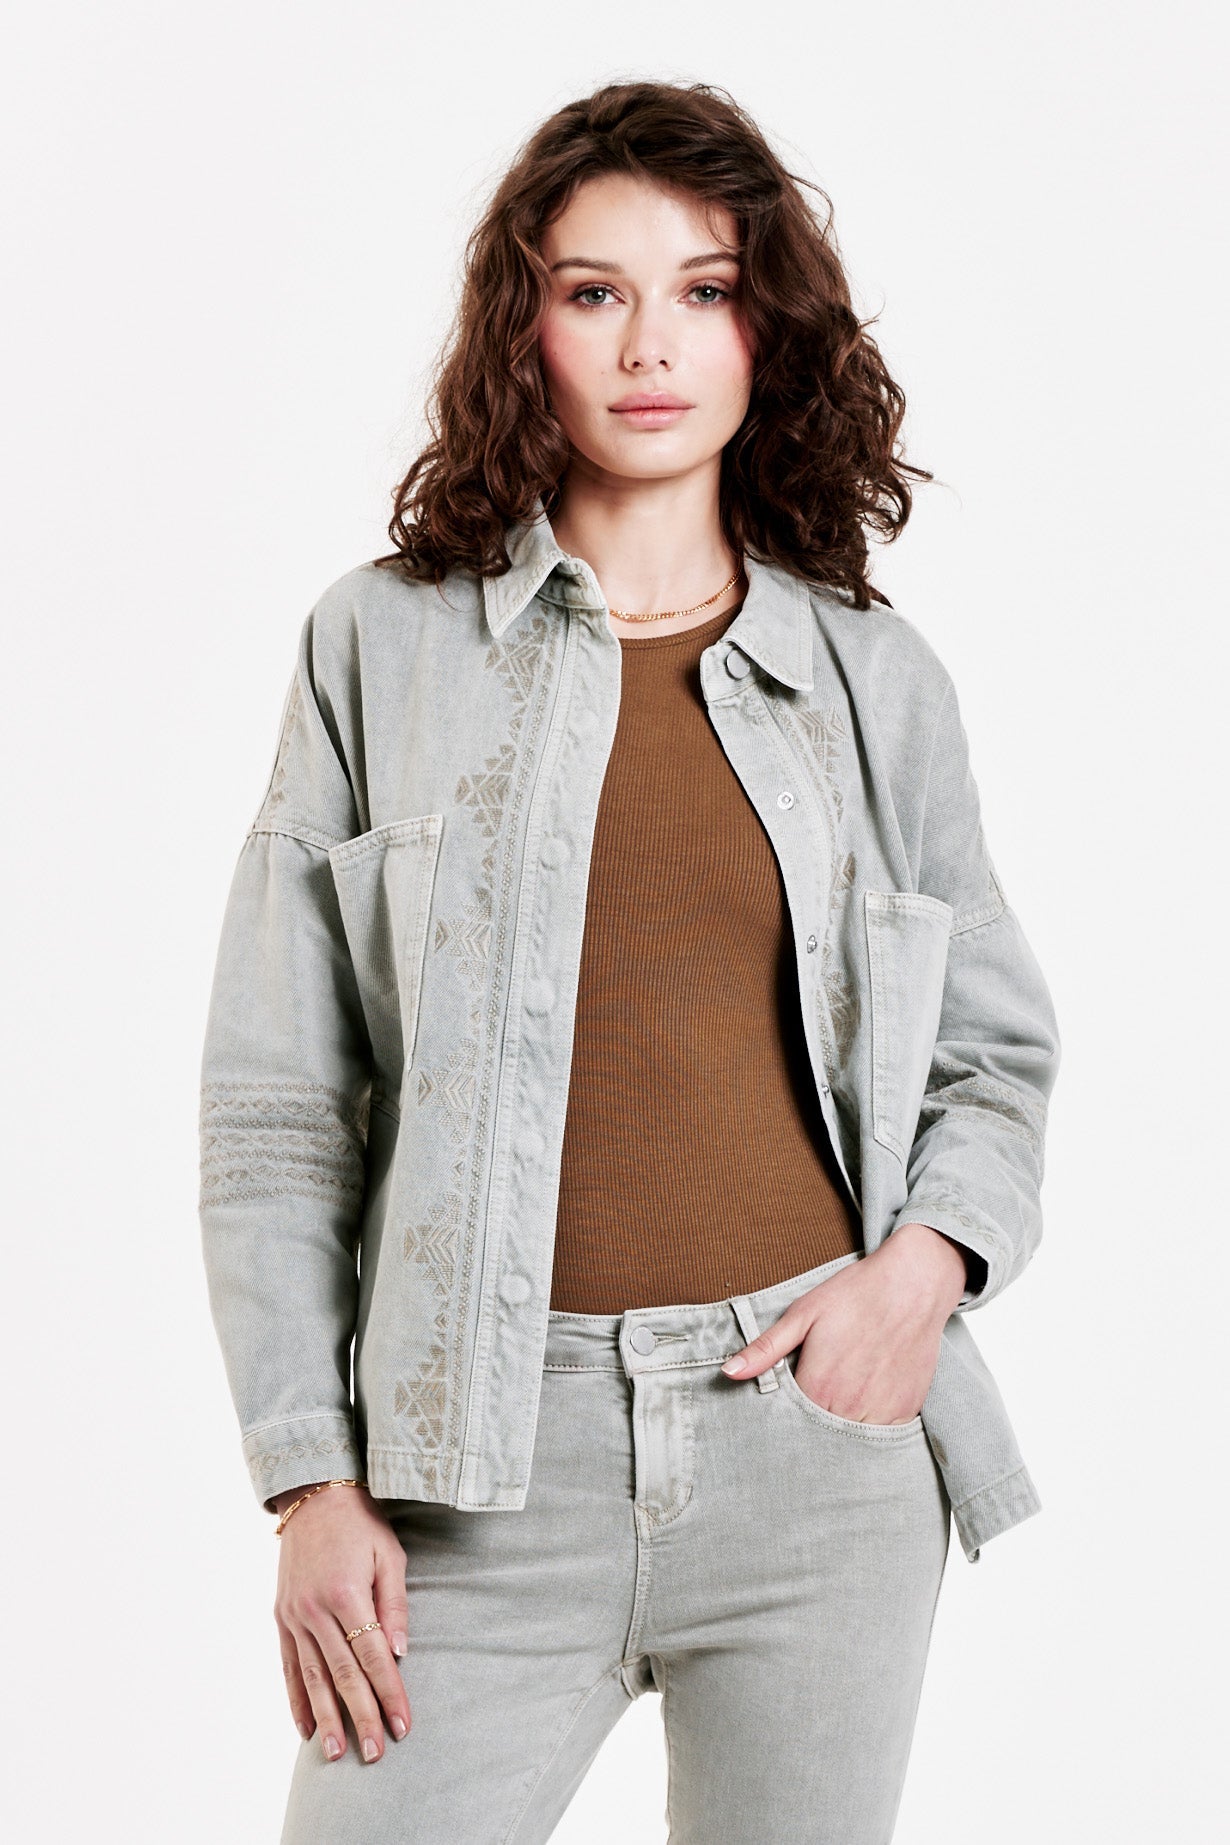 Relaxed Denim Jacket for Tall Women | American Tall